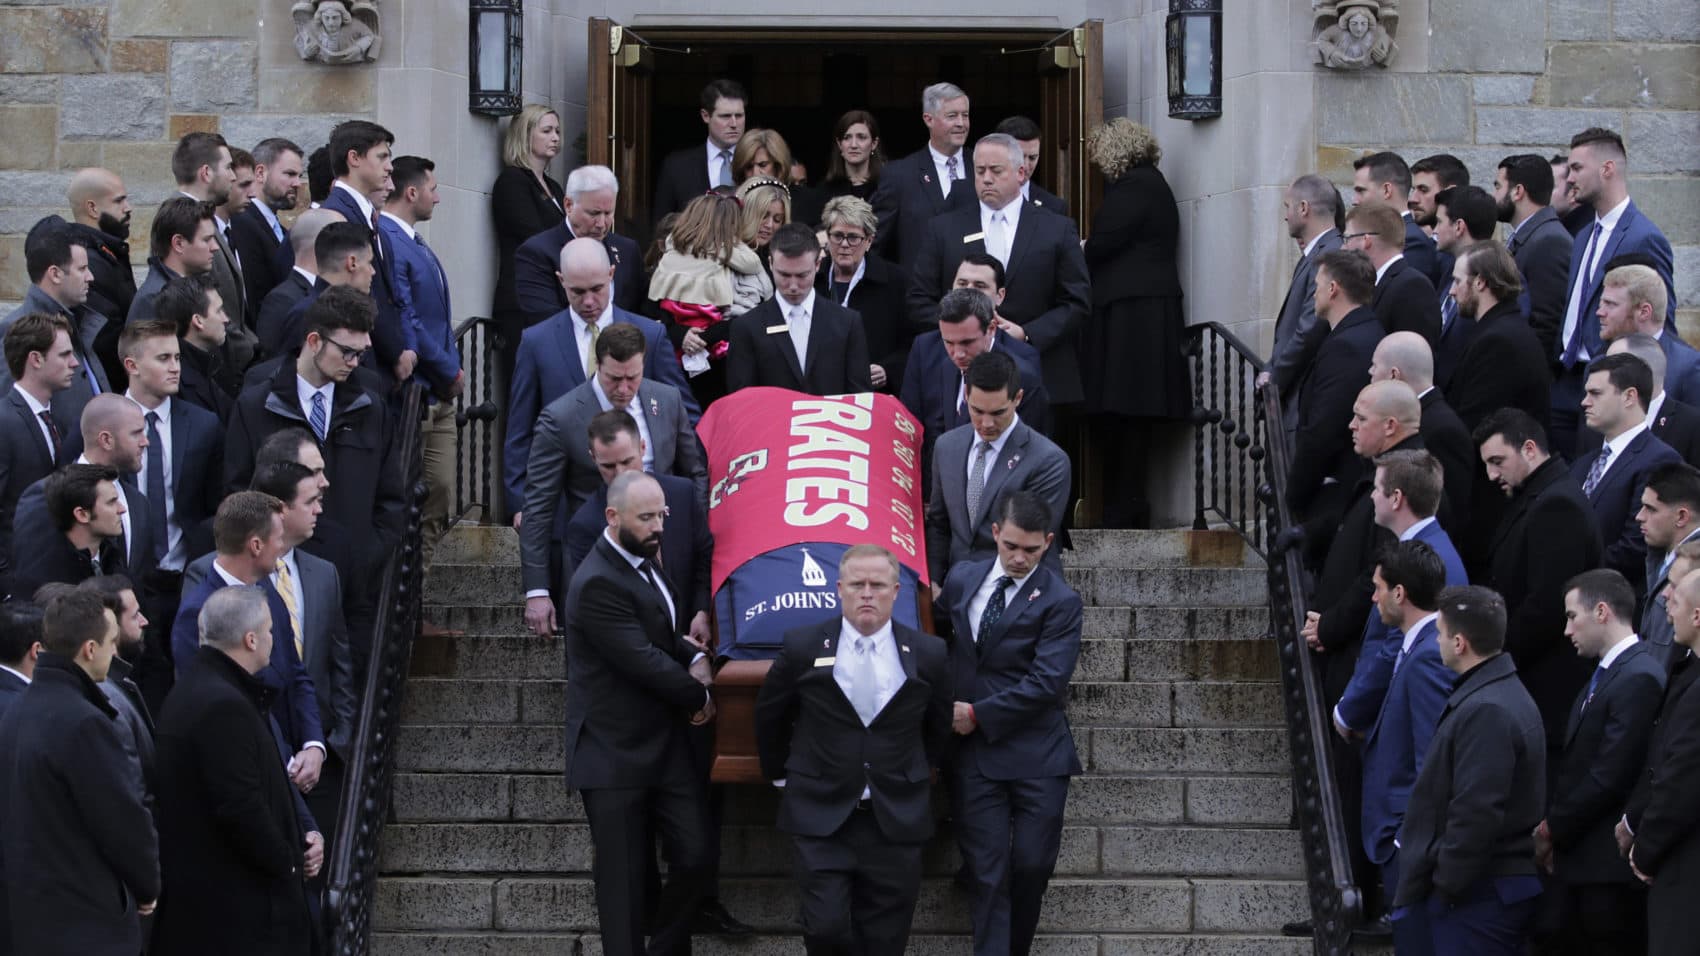 Boston College athletes, from past and present teams, watch as the casket is carried from the funeral of Pete Frates at St. Ignatius of Loyola Parish in Chestnut Hill. (Charles Krupa/AP)